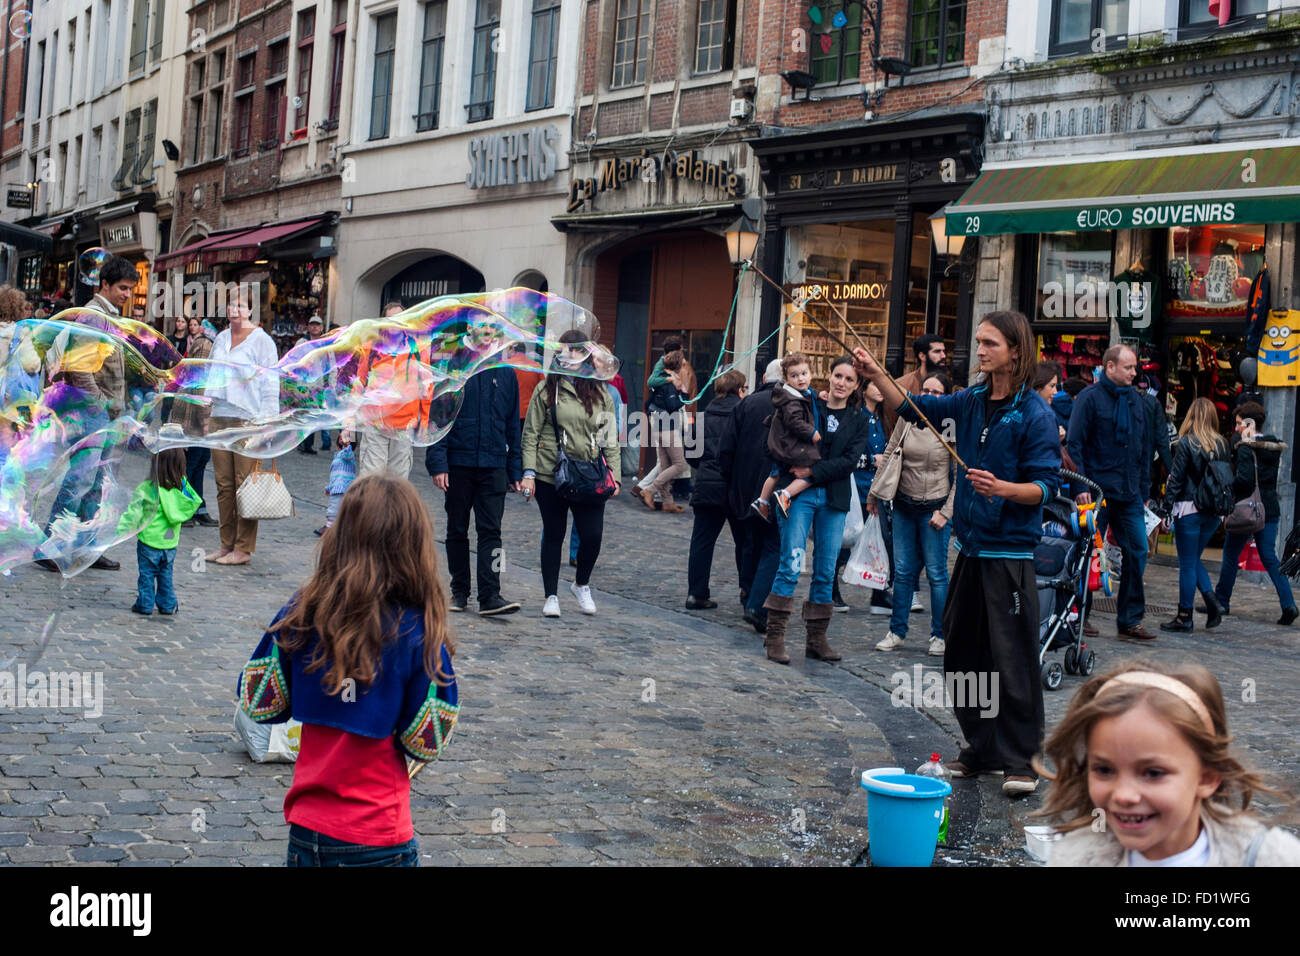 A street artist makes giant soap bubbles around Grand in Brussels Stock Photo